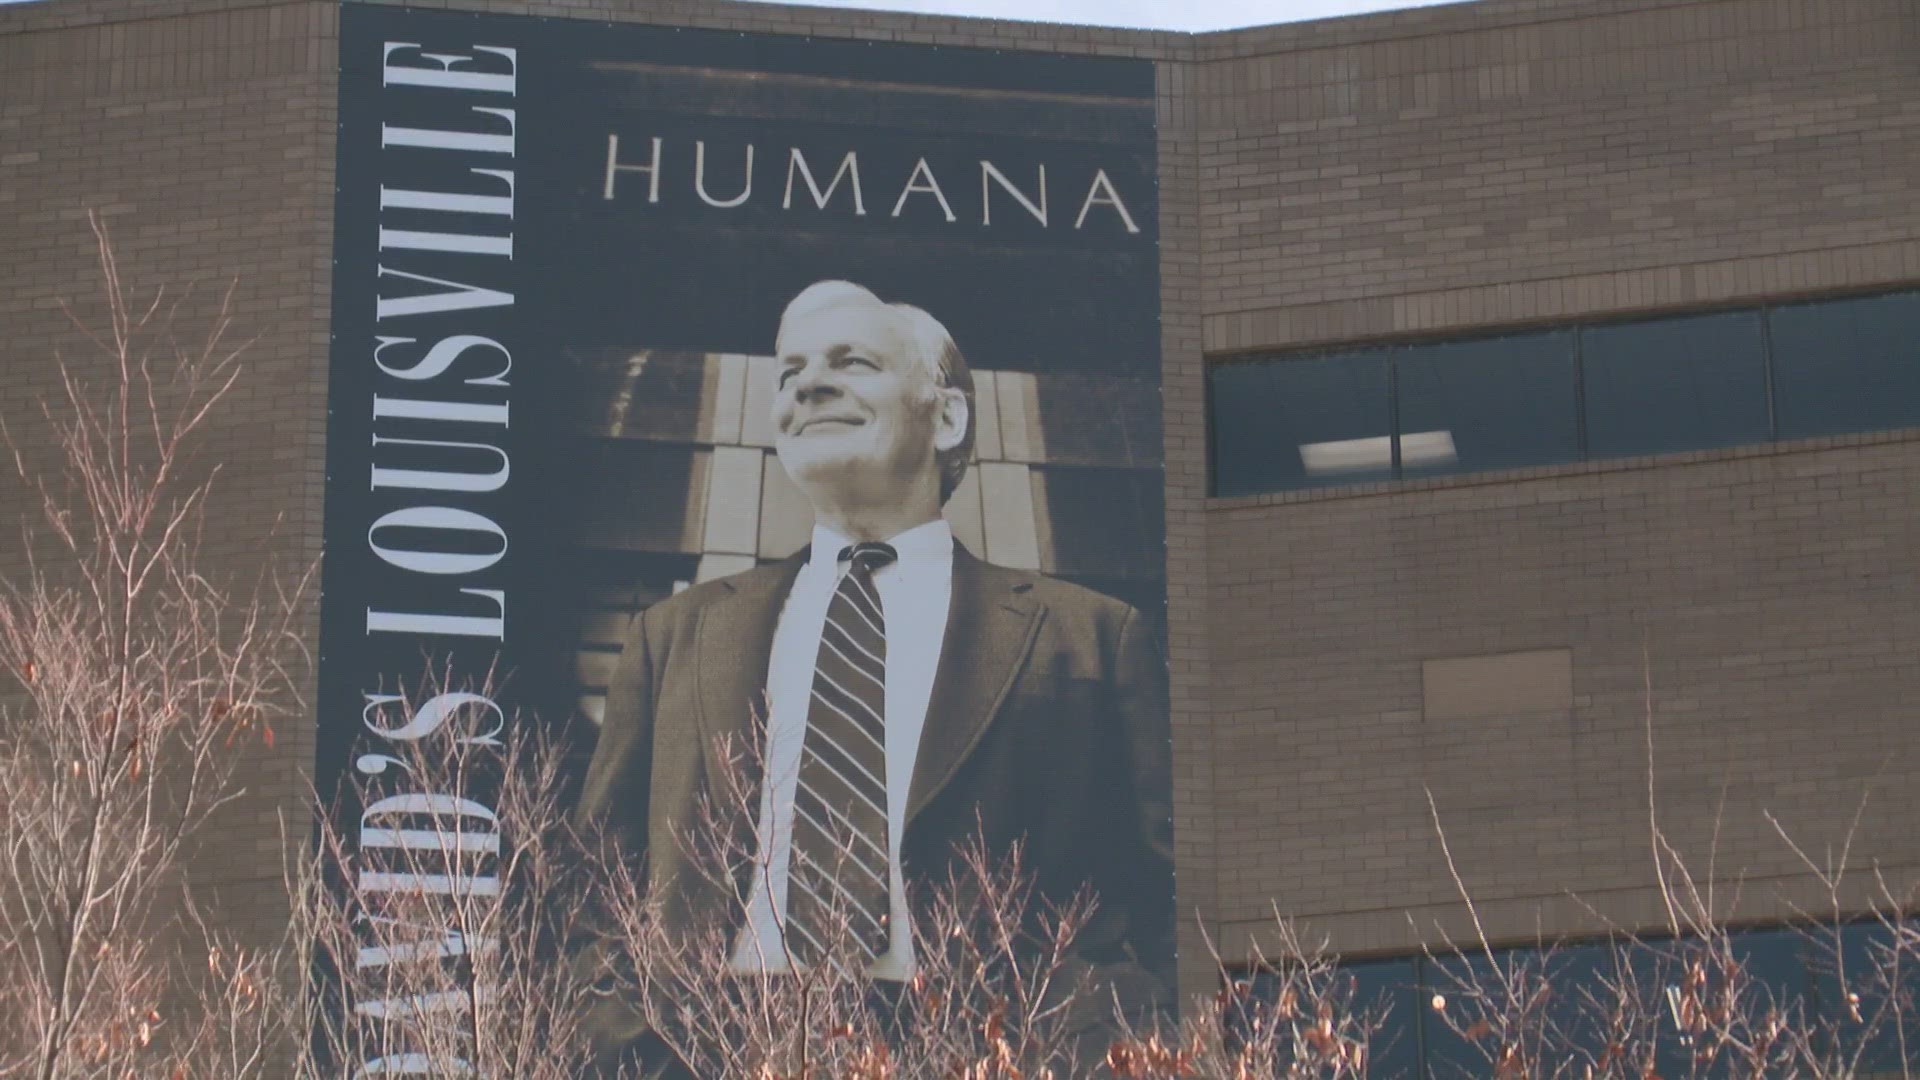 A Hometown Hero banner was unveiled Thursday honoring Humana co-founder, David Jones Sr., a lifelong Louisvillian who grew up in West Louisville.